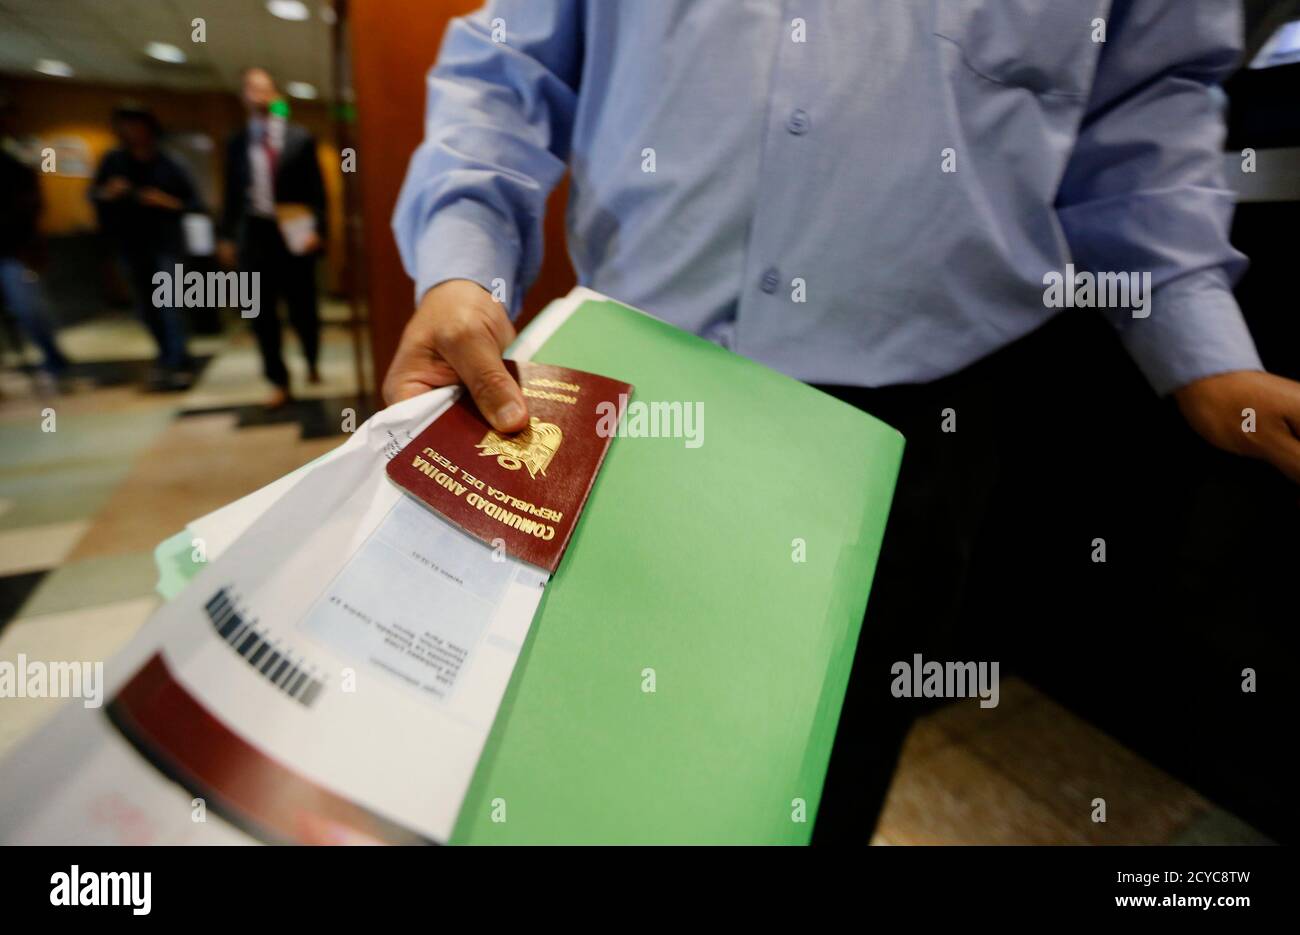 A man, holding a Peruvian passport and documents, participates in a visa  application demonstration during a media tour at the consular section of  the Embassy of the United States in Lima October